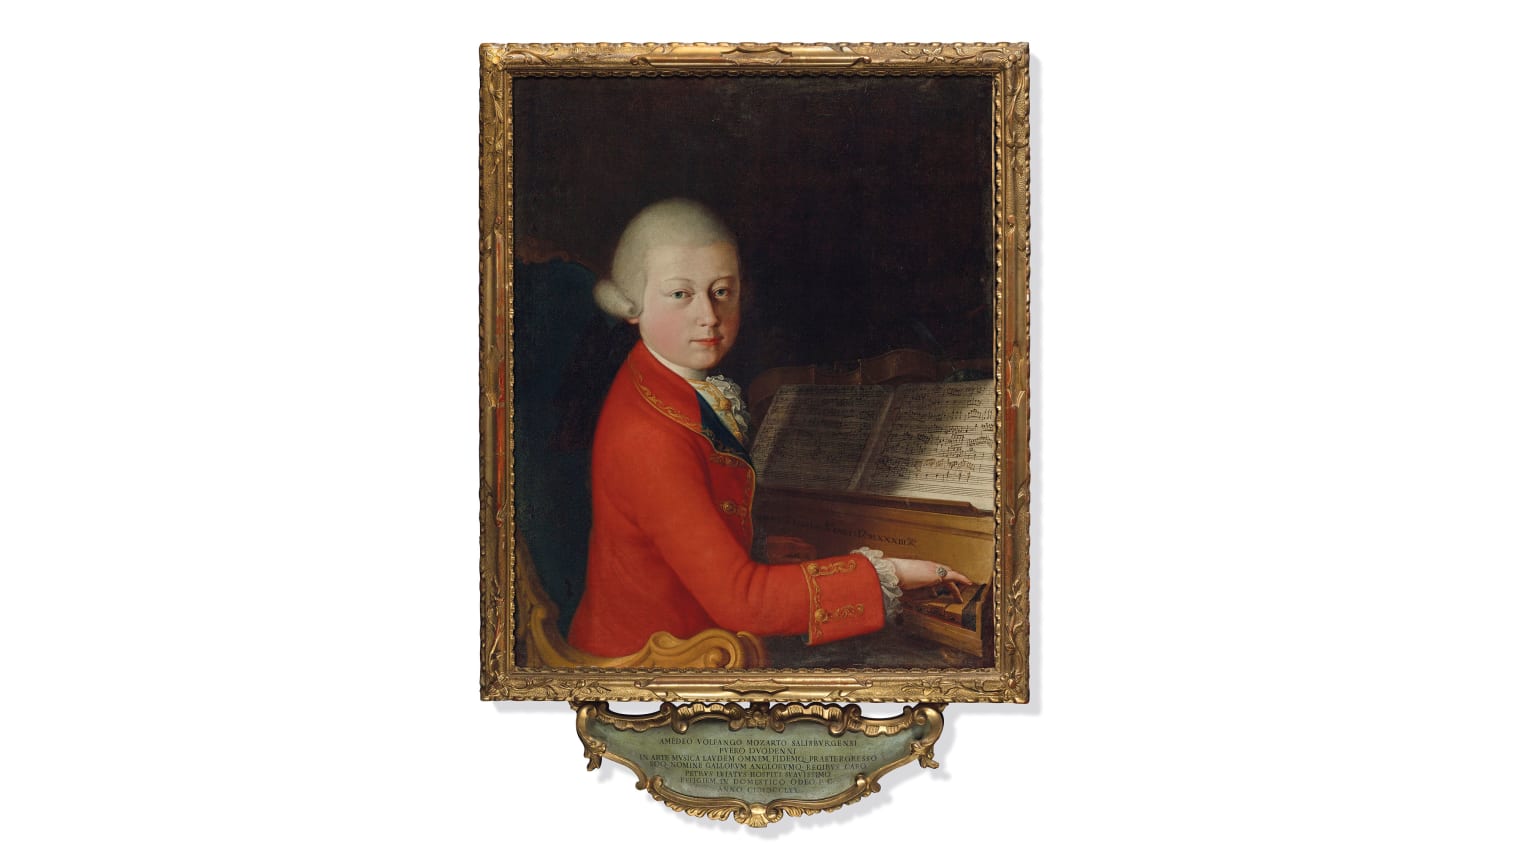 The painting, which shows 13-year-old Mozart playing a harpsichord, smashed auction estimates when it went under the hammer in Paris on Wednesday.